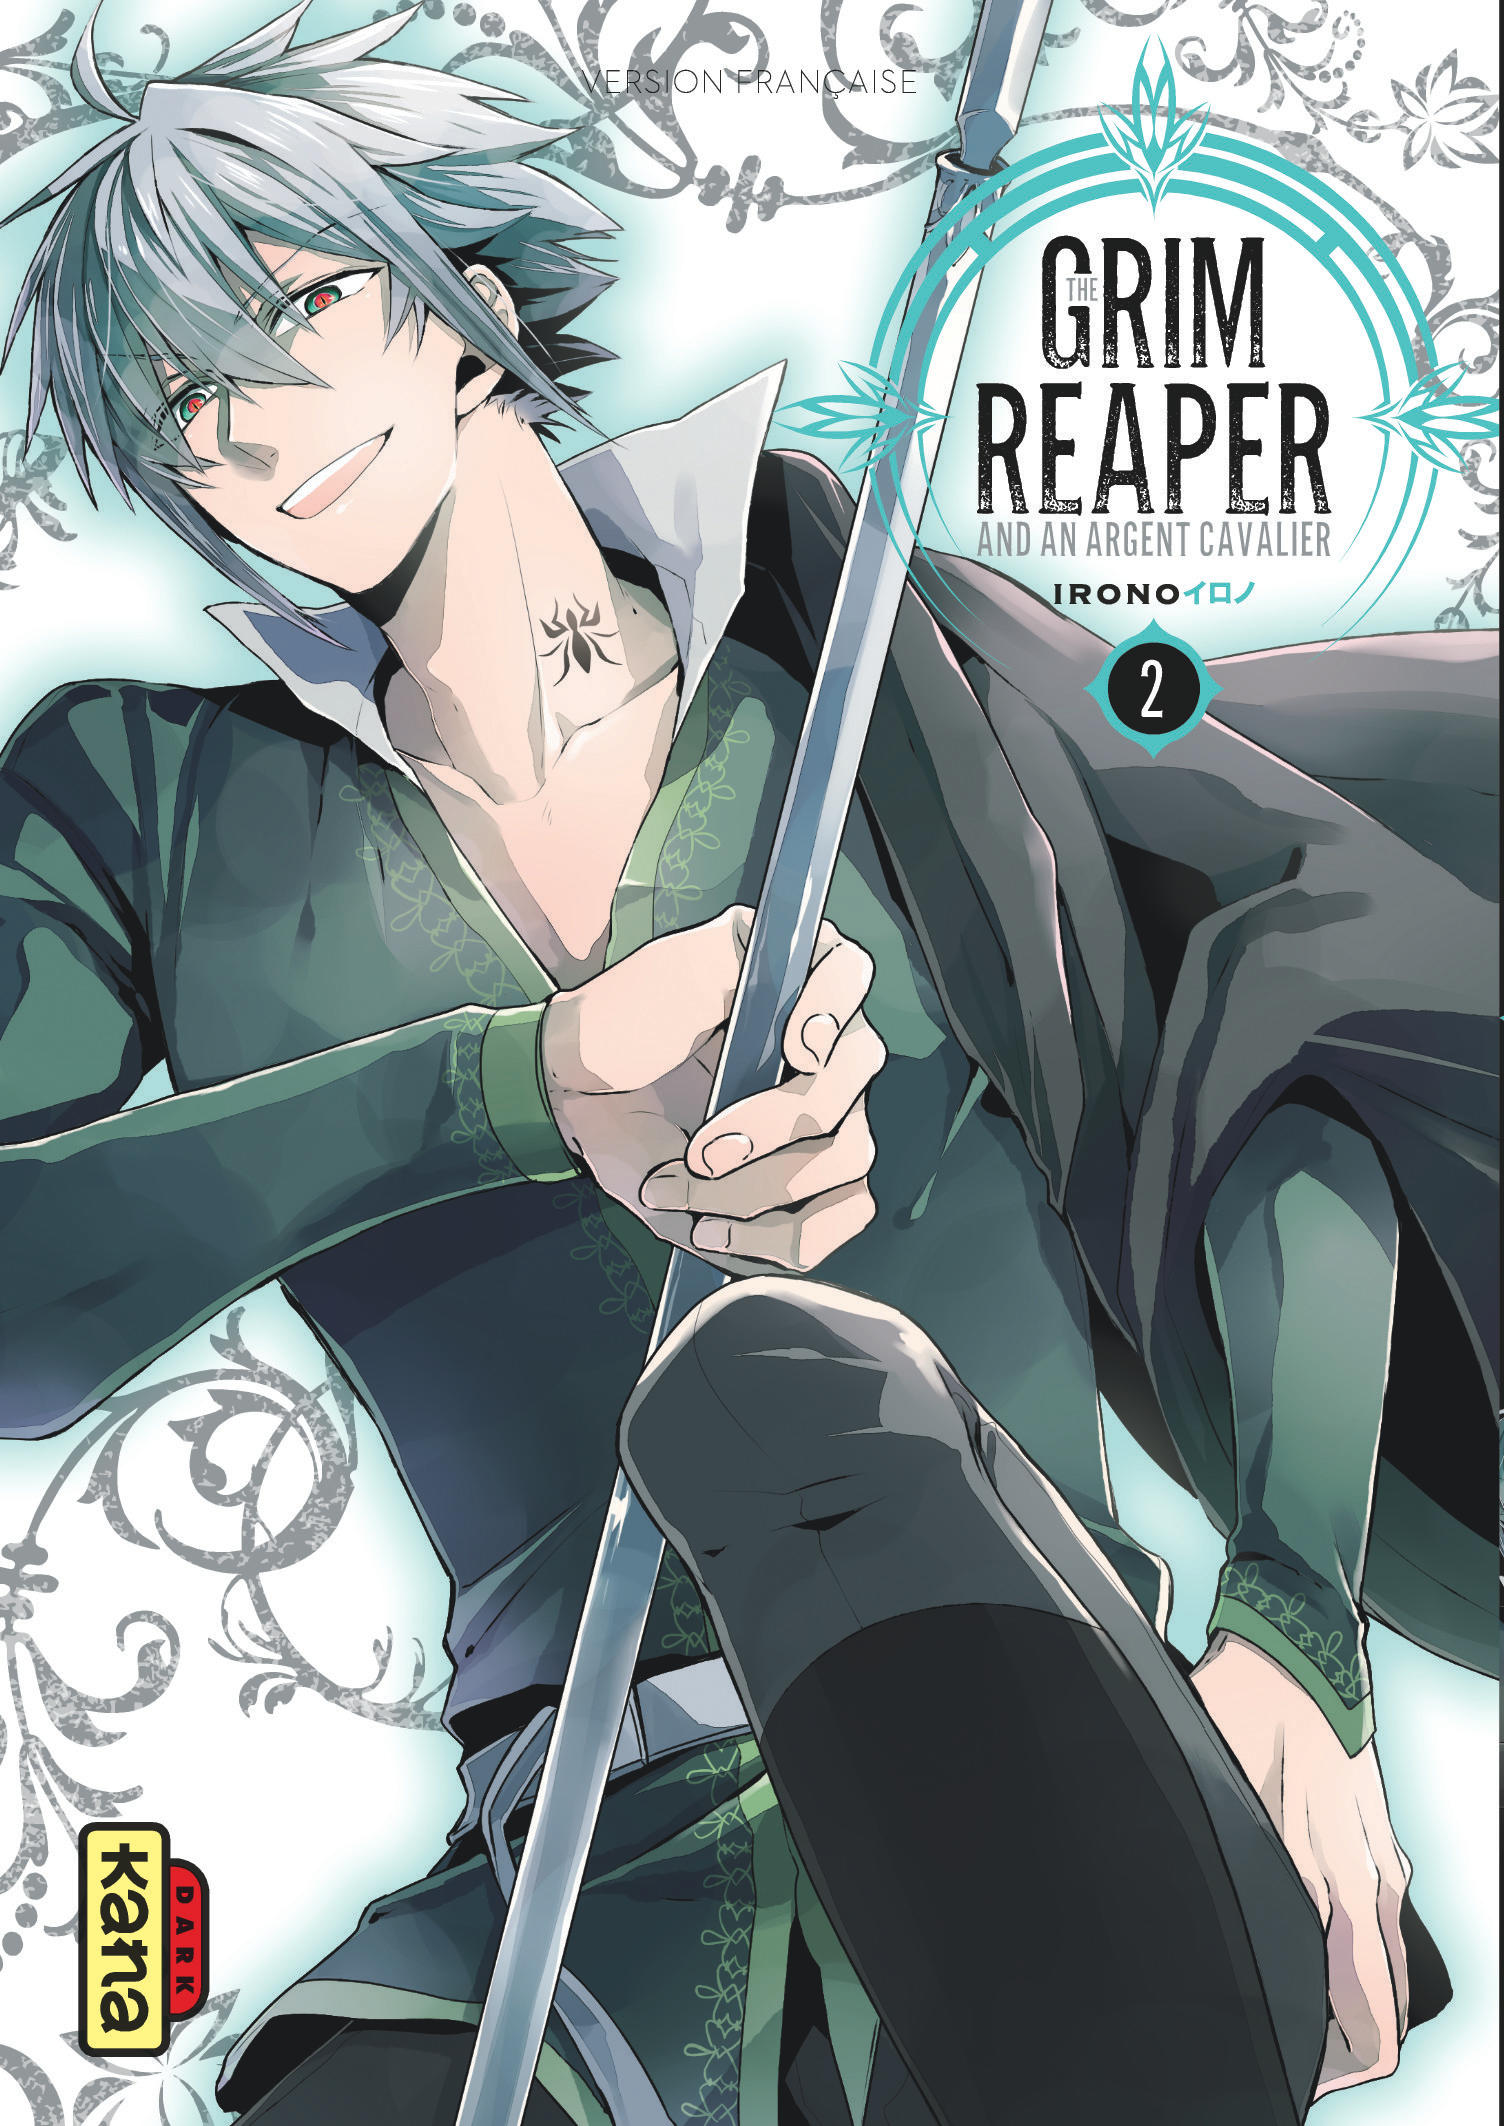 The grim reaper and an argent cavalier – Tome 2 - couv